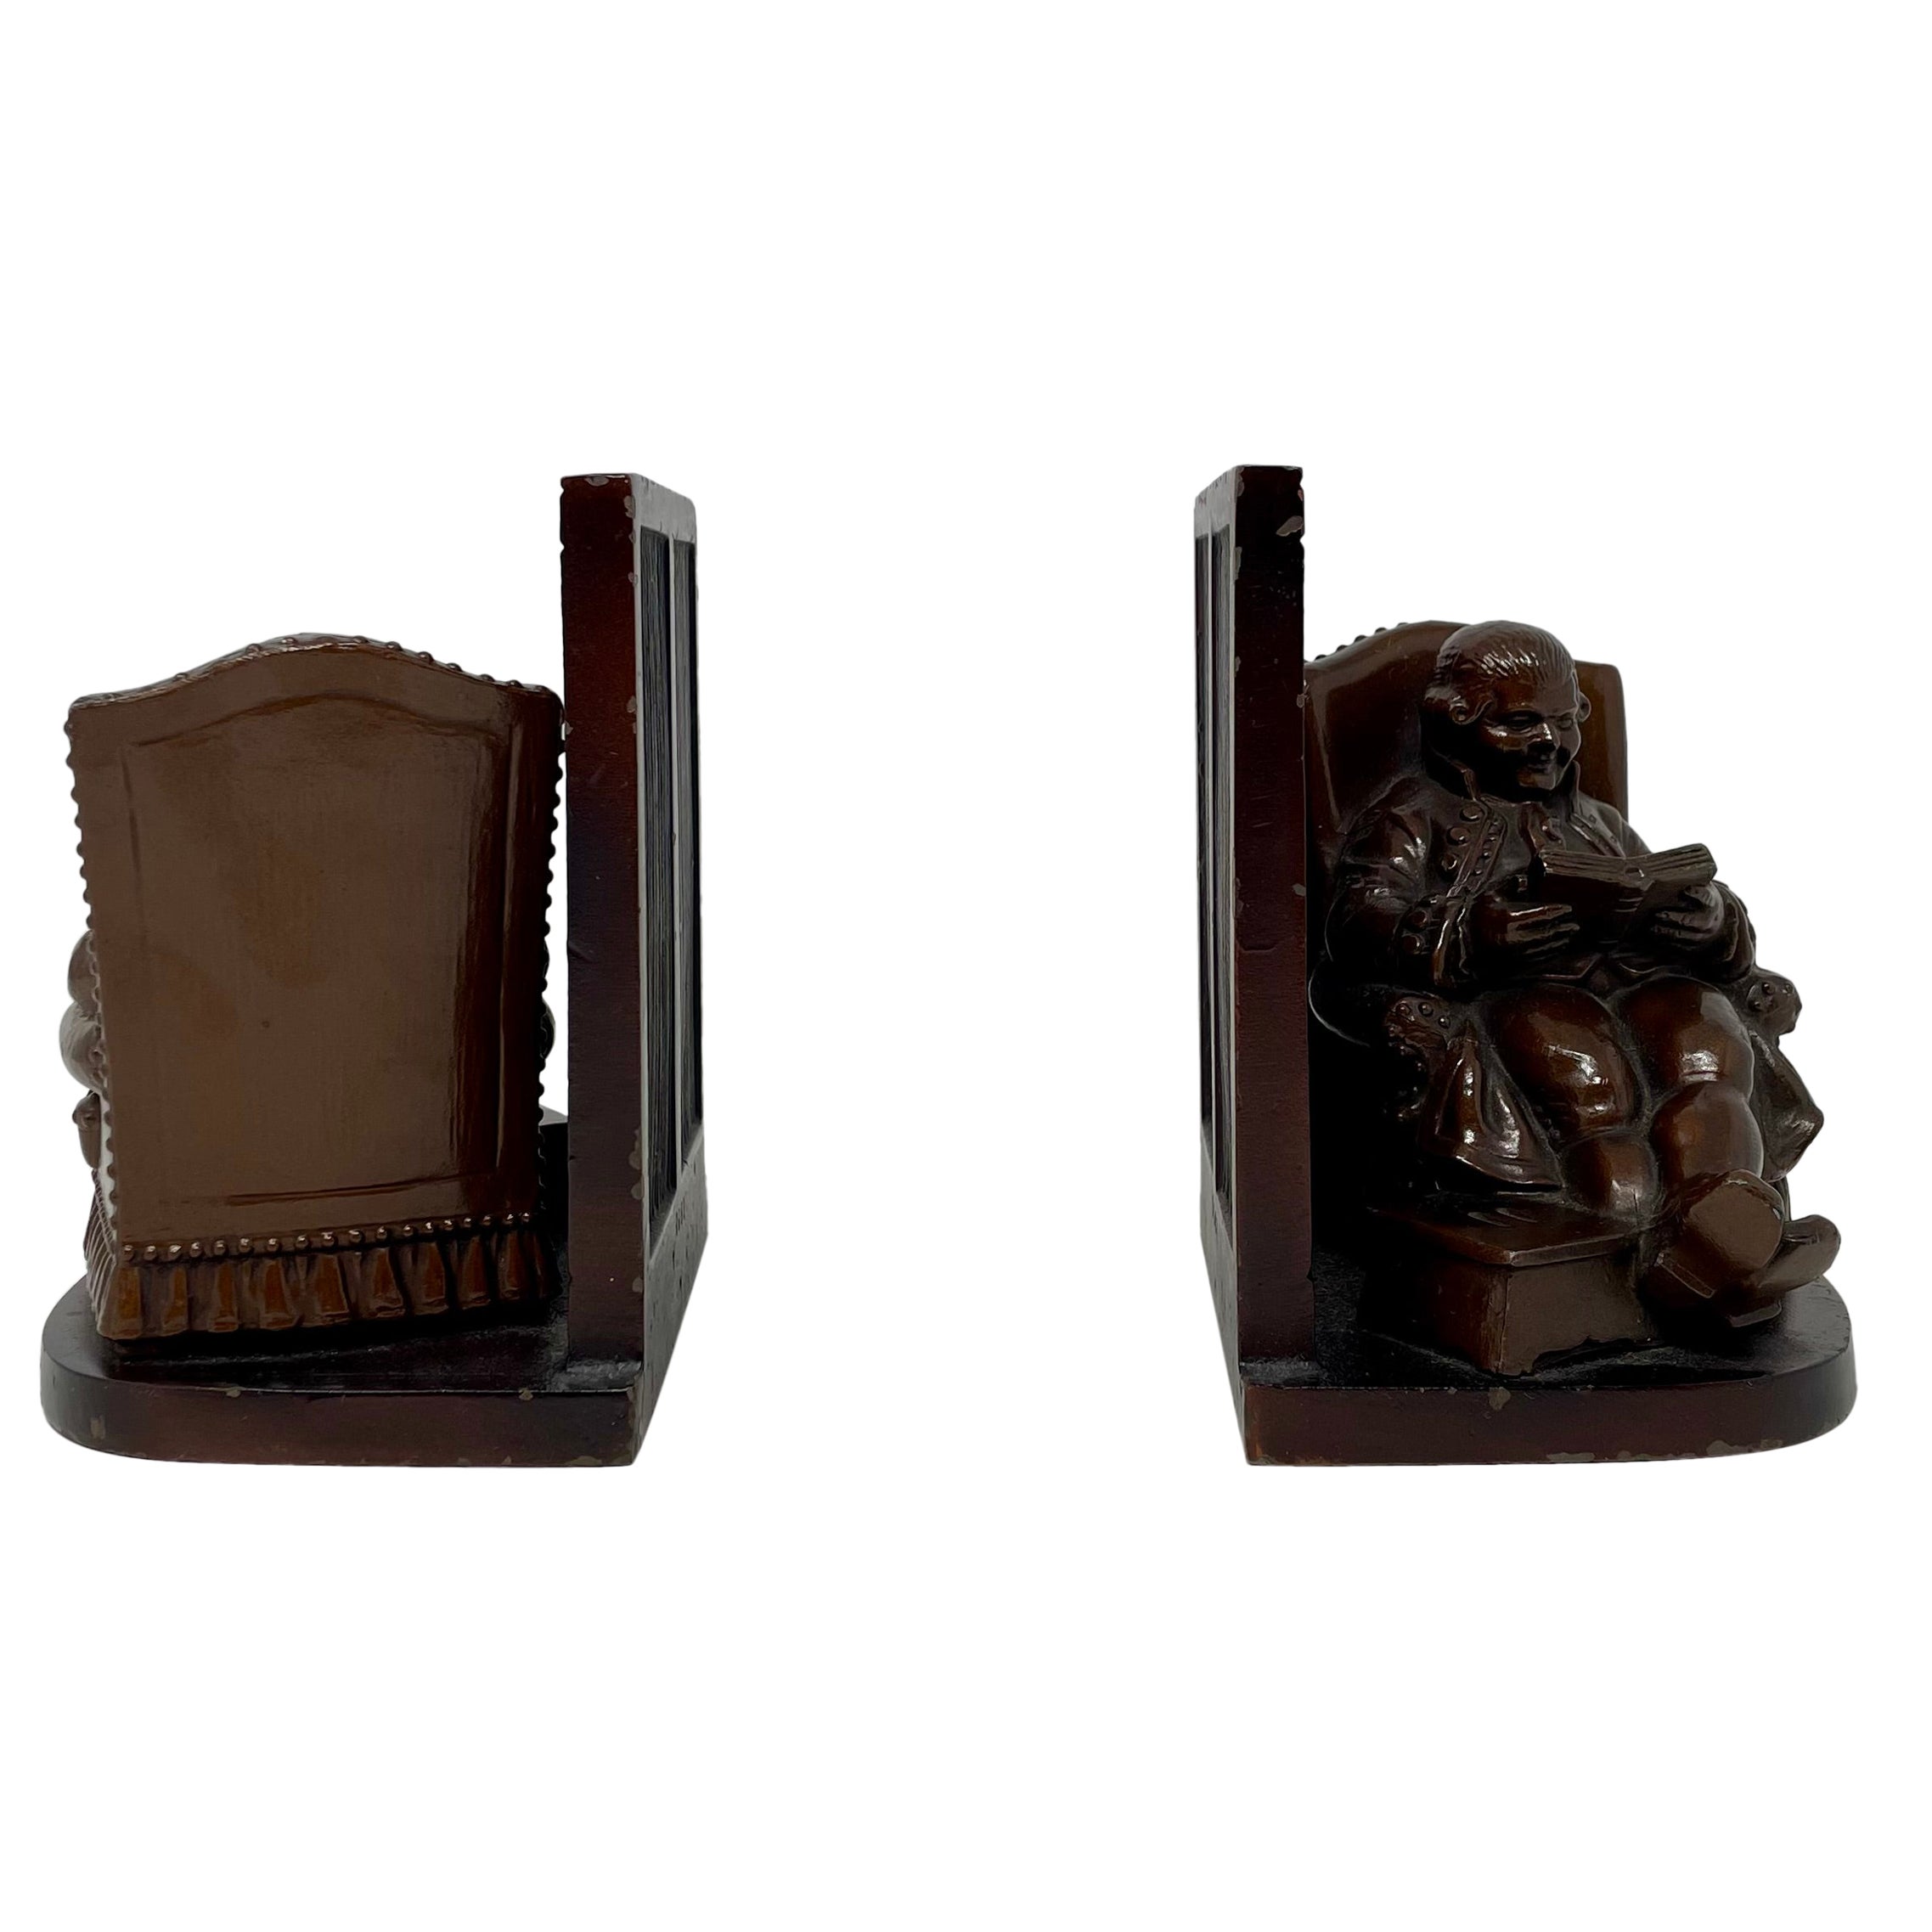 Pair Antique American Figural "Father Knickerbocker" Bookends, Circa 1890-1910. For Sale